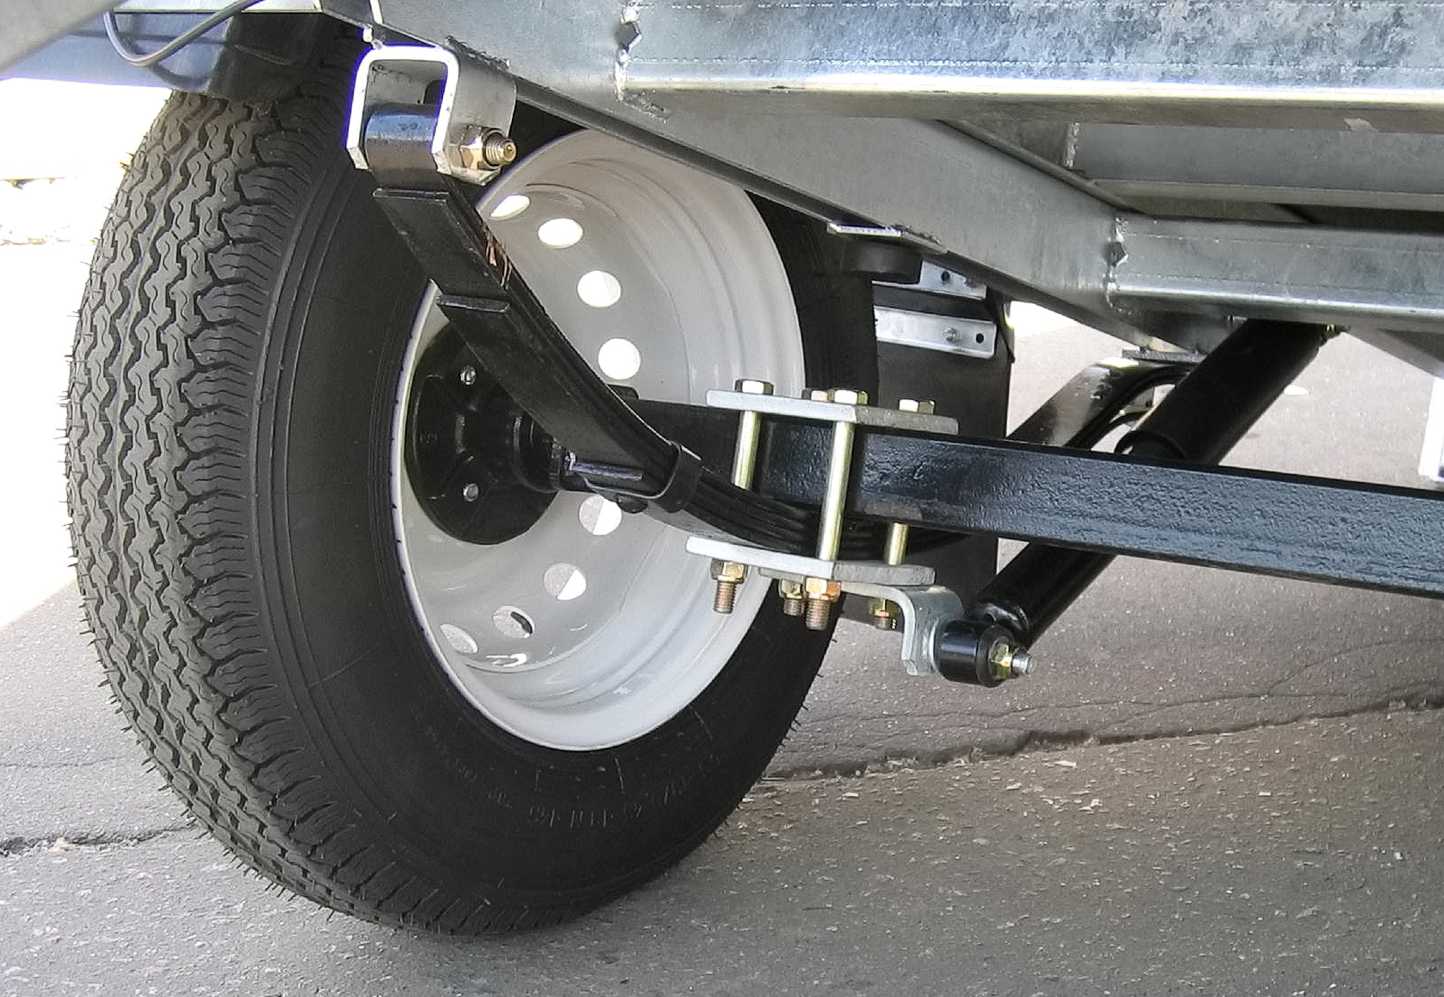 Trailers and Spares service, repair and modify suspension and chassis on any type of trailer.